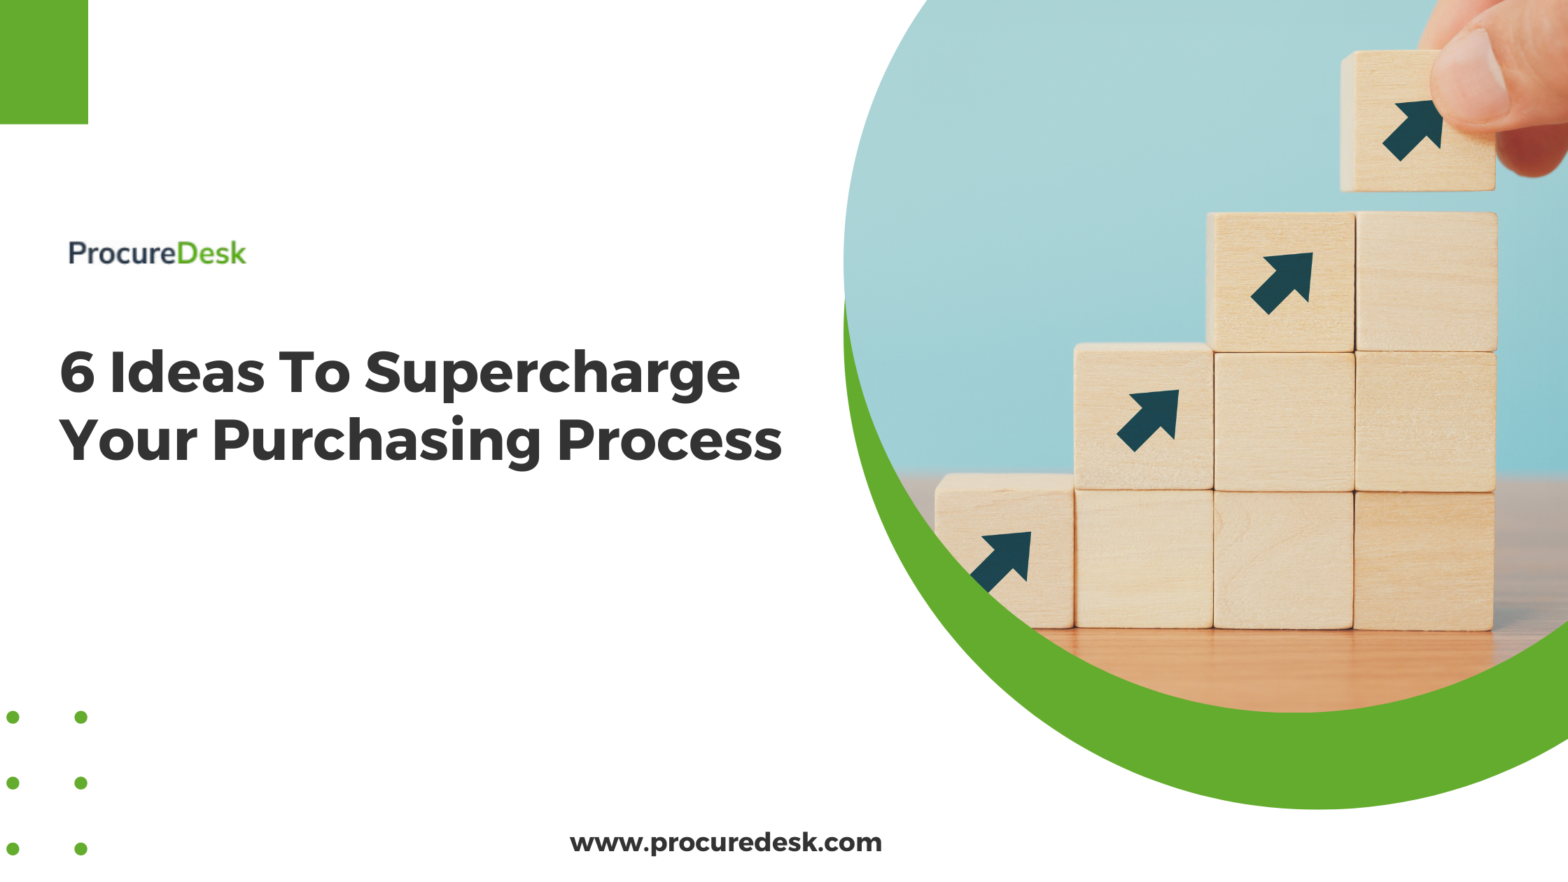 6 ideas to supercharge your purchasing process